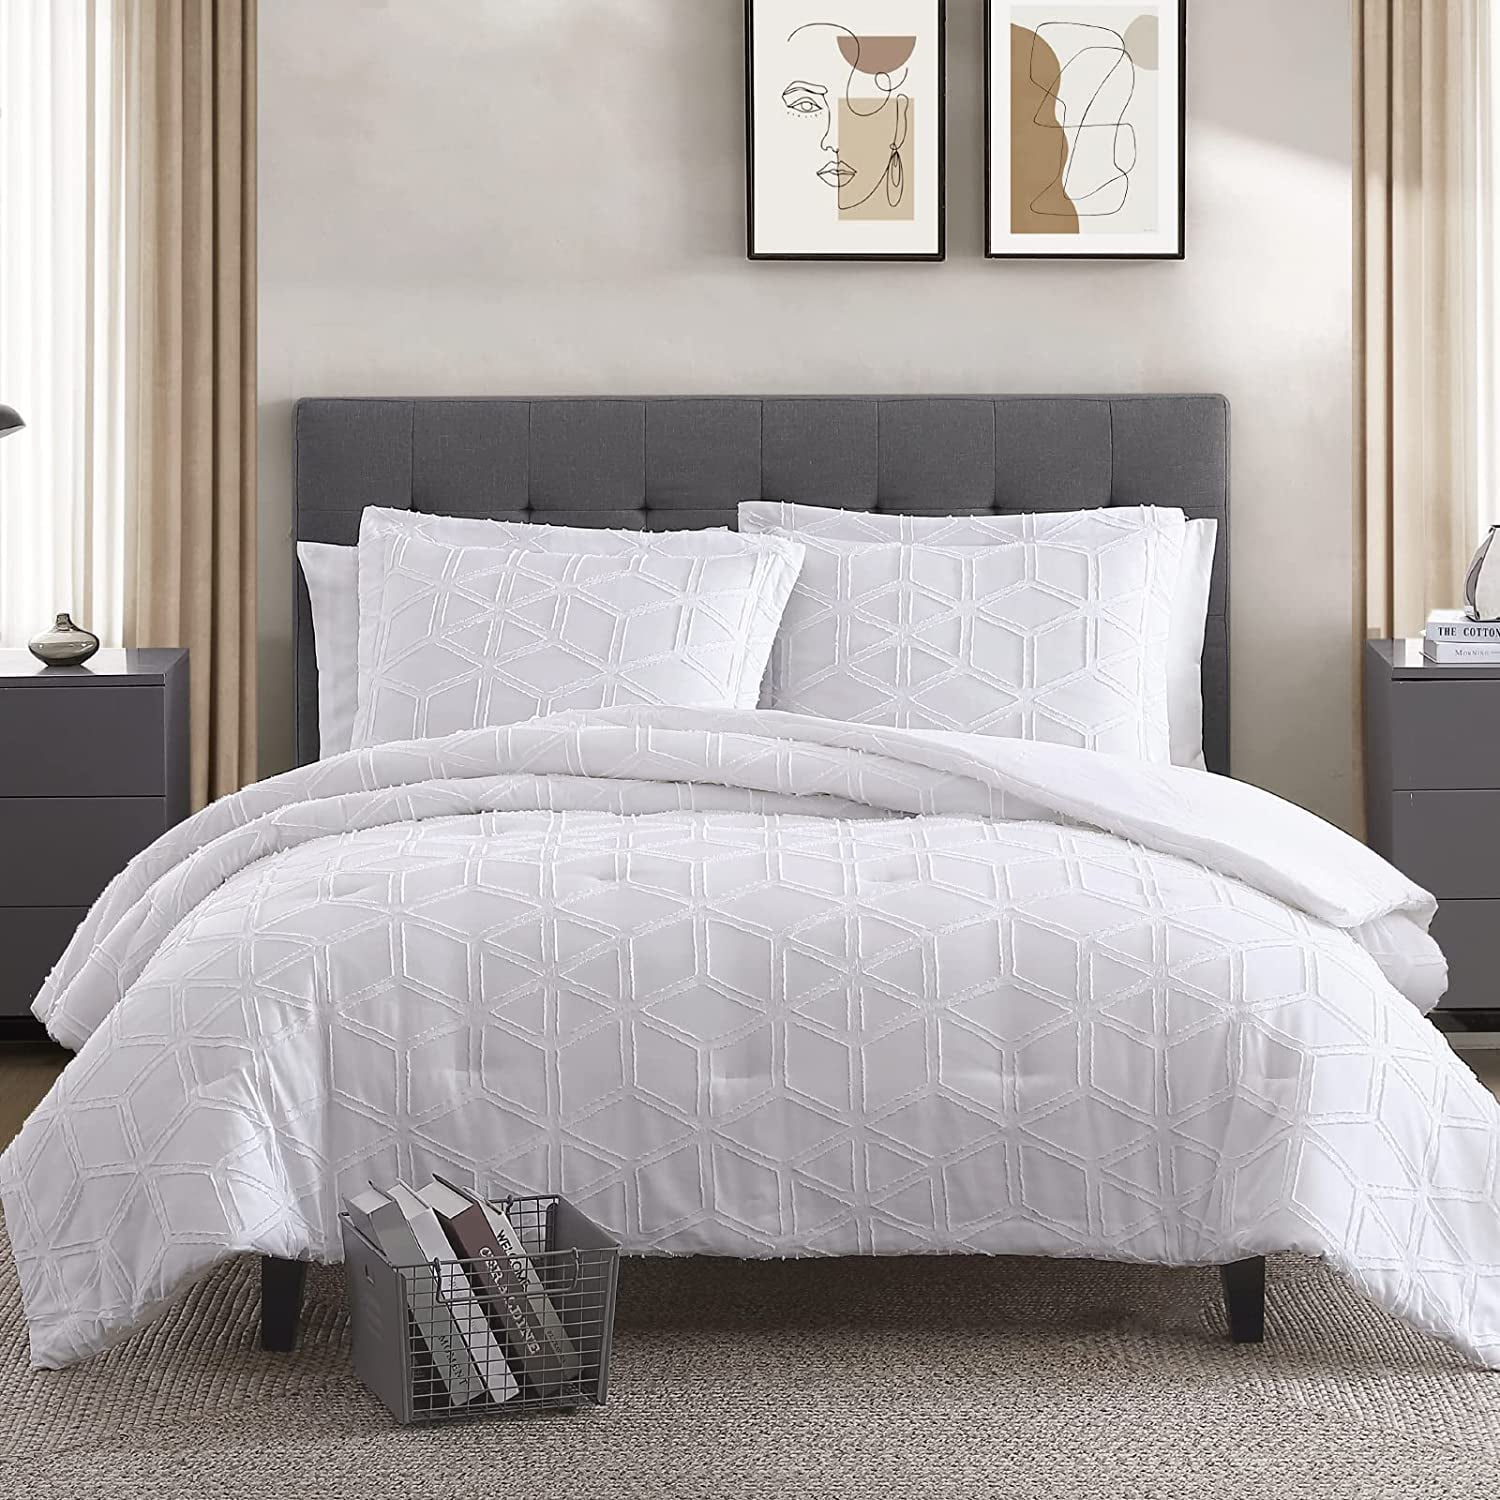 Walensee Queen Clipped Jacquard Diamond Comforter Set, 3 Pieces Bed ...